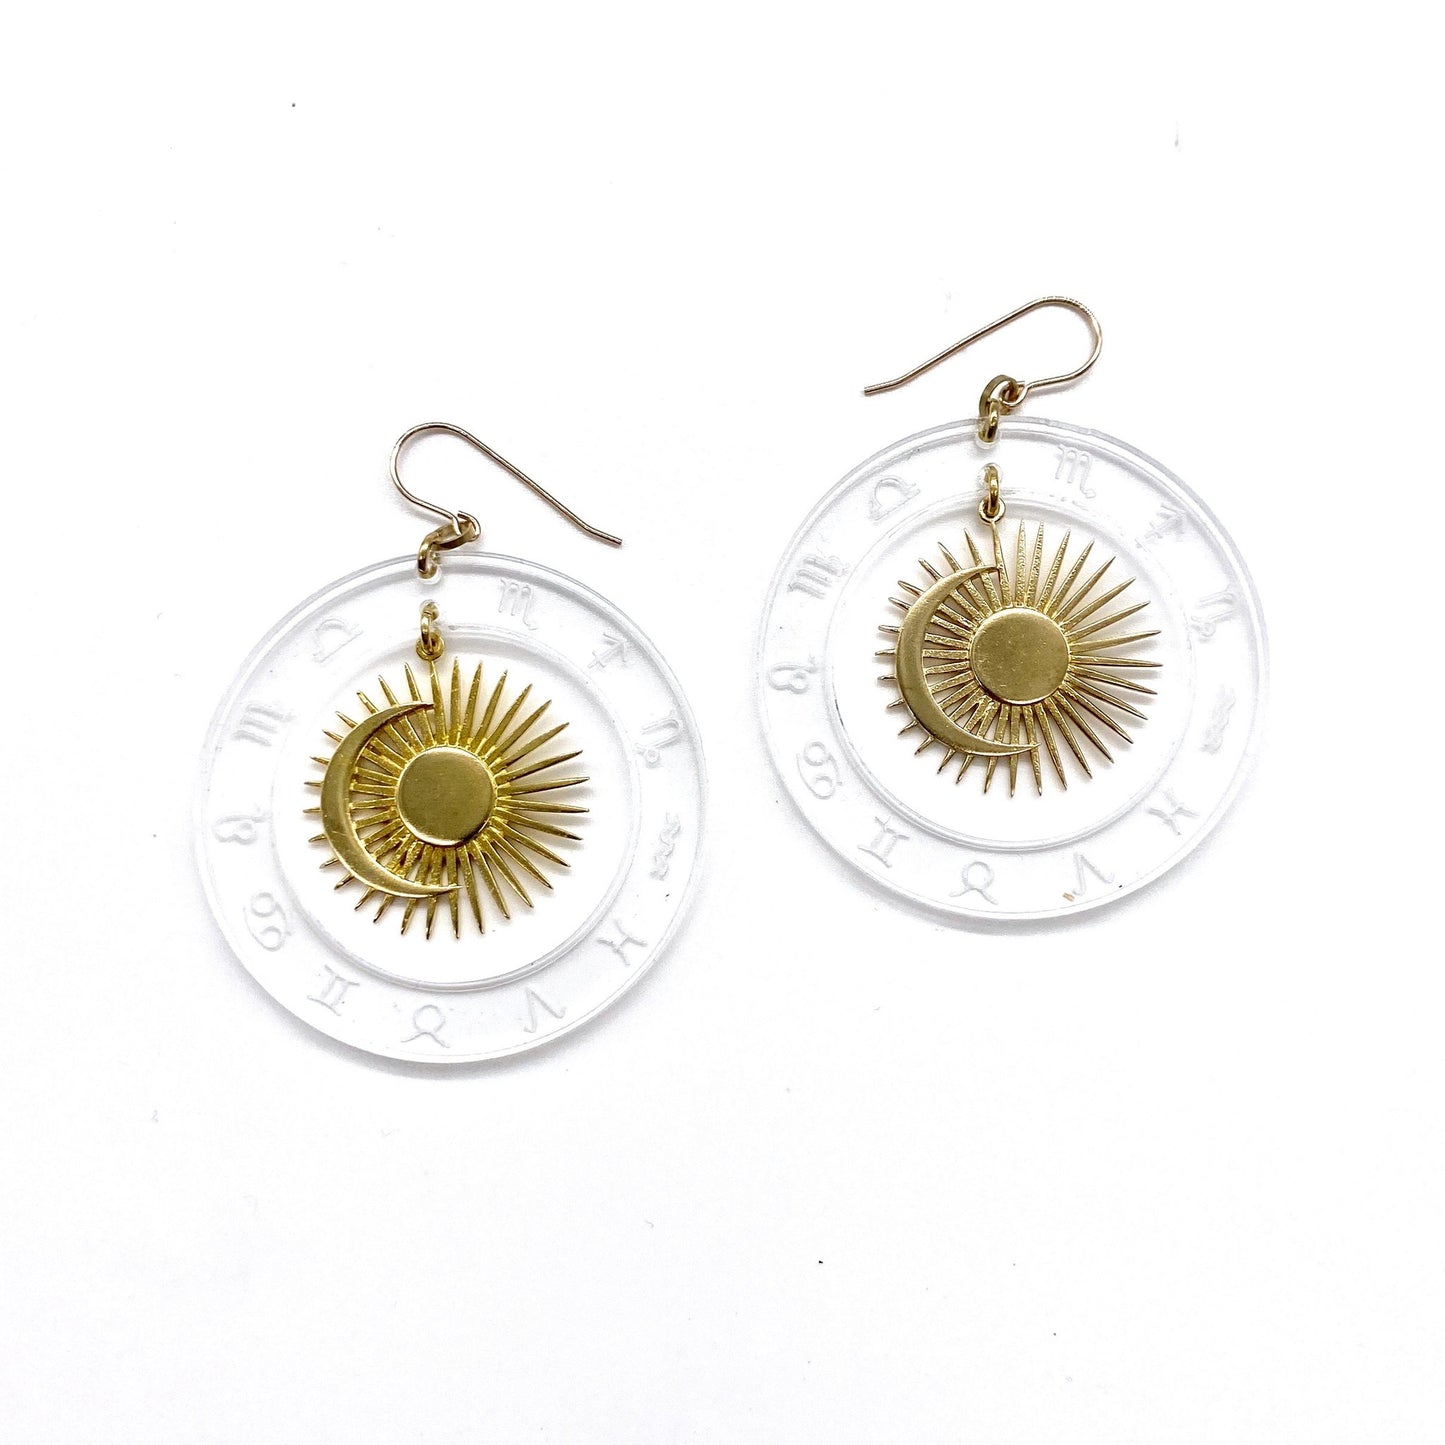 Lucite and brass hoop earrings with celestial zodiac design.